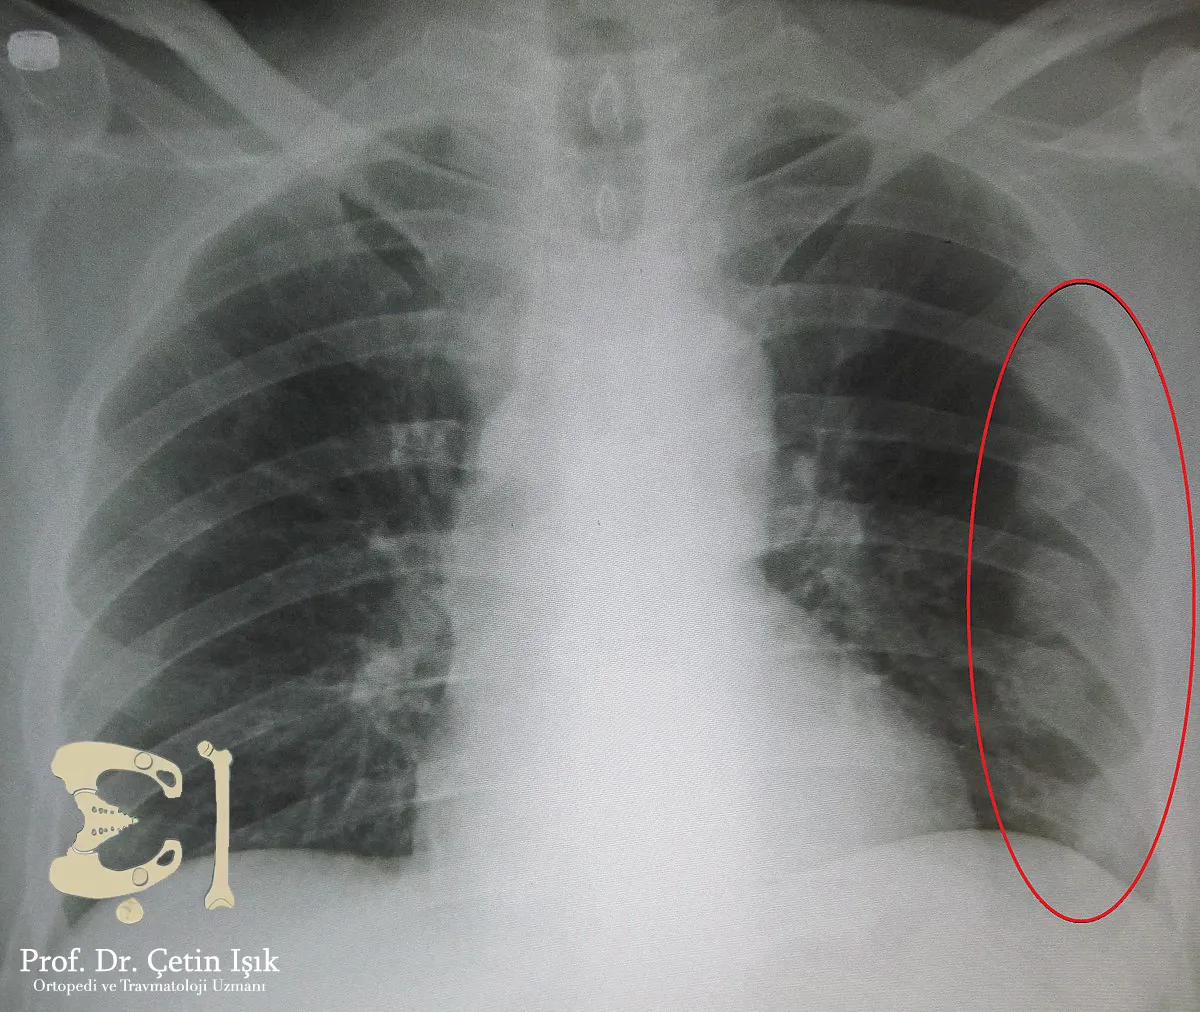 On the radiograph, we can see that there are several broken ribs on the left side of the rib cage